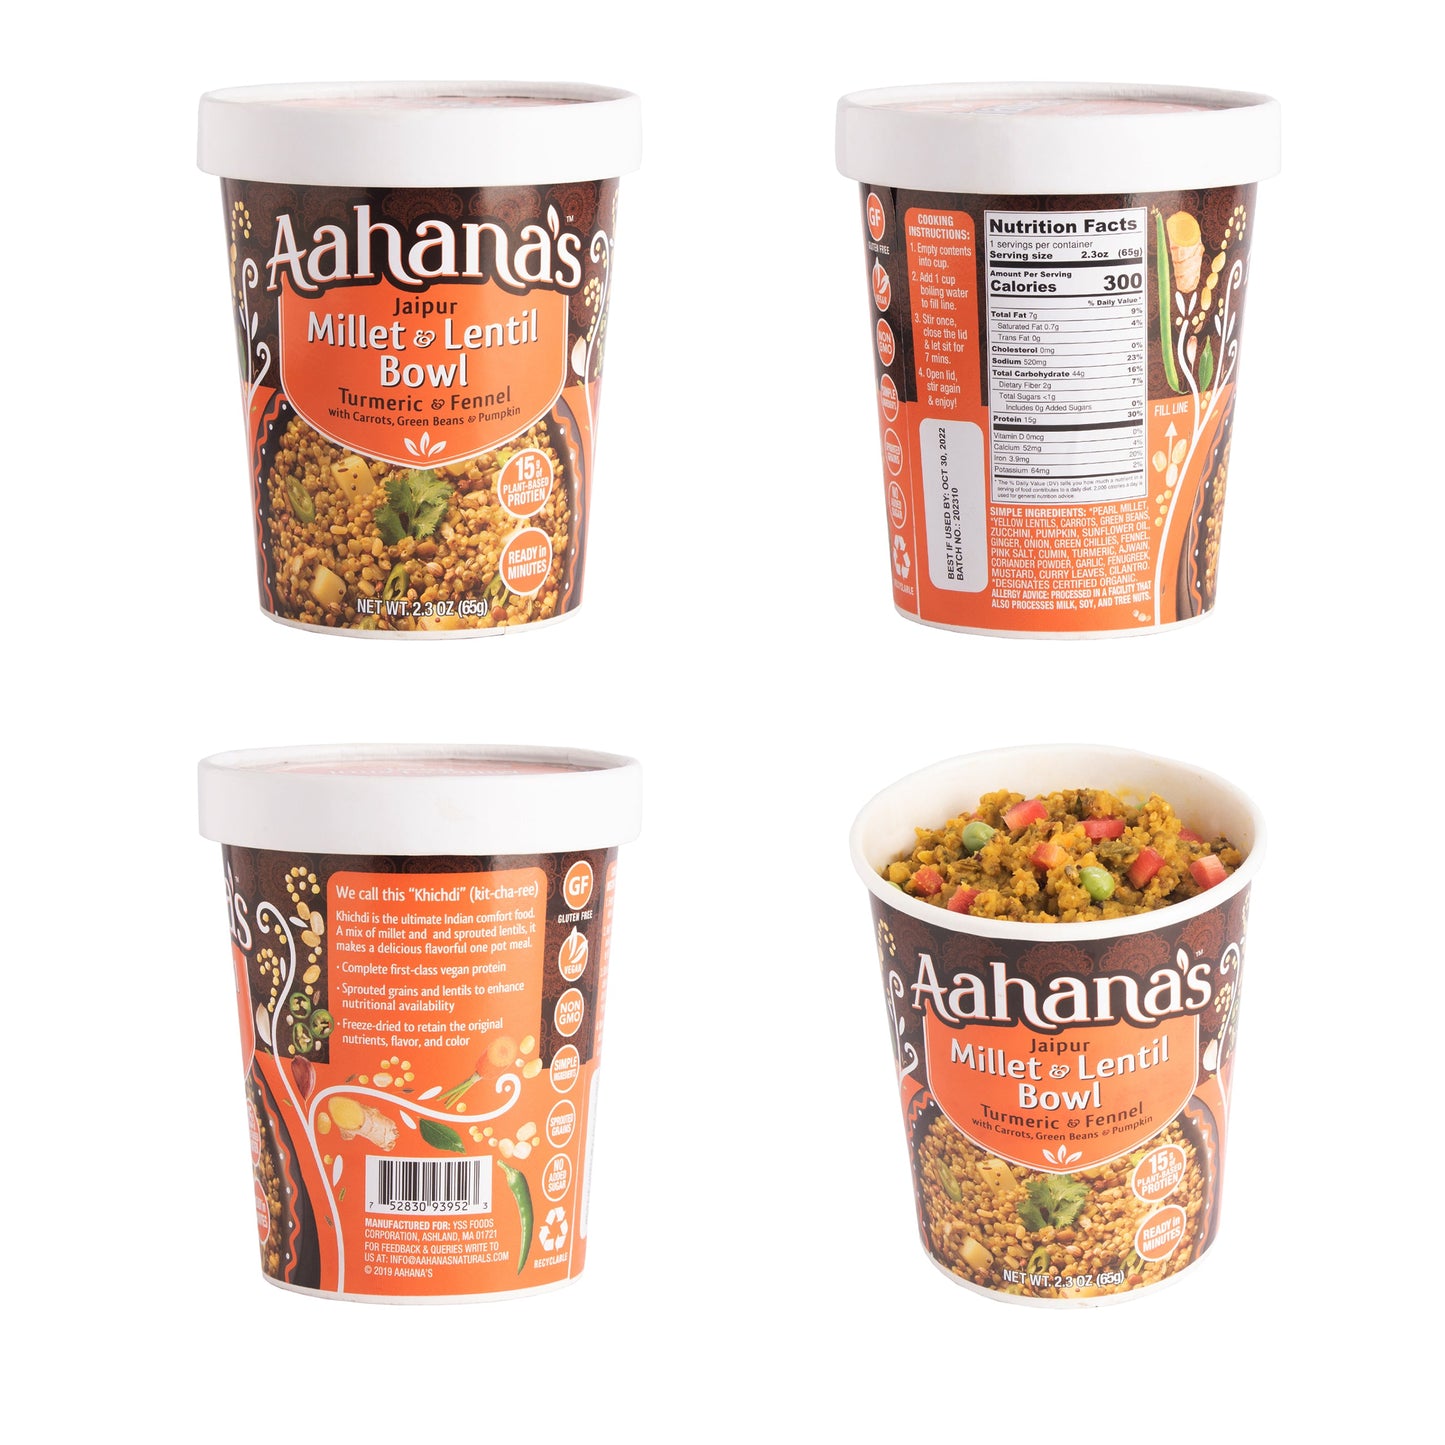 aahana's jaipur millet & lentil bowl (khichdi) - gluten-free, 15g plant-based protein, vegan, non-gmo, ready-to-eat meal (2.3oz., pack of 4) by aahanasnaturals.com